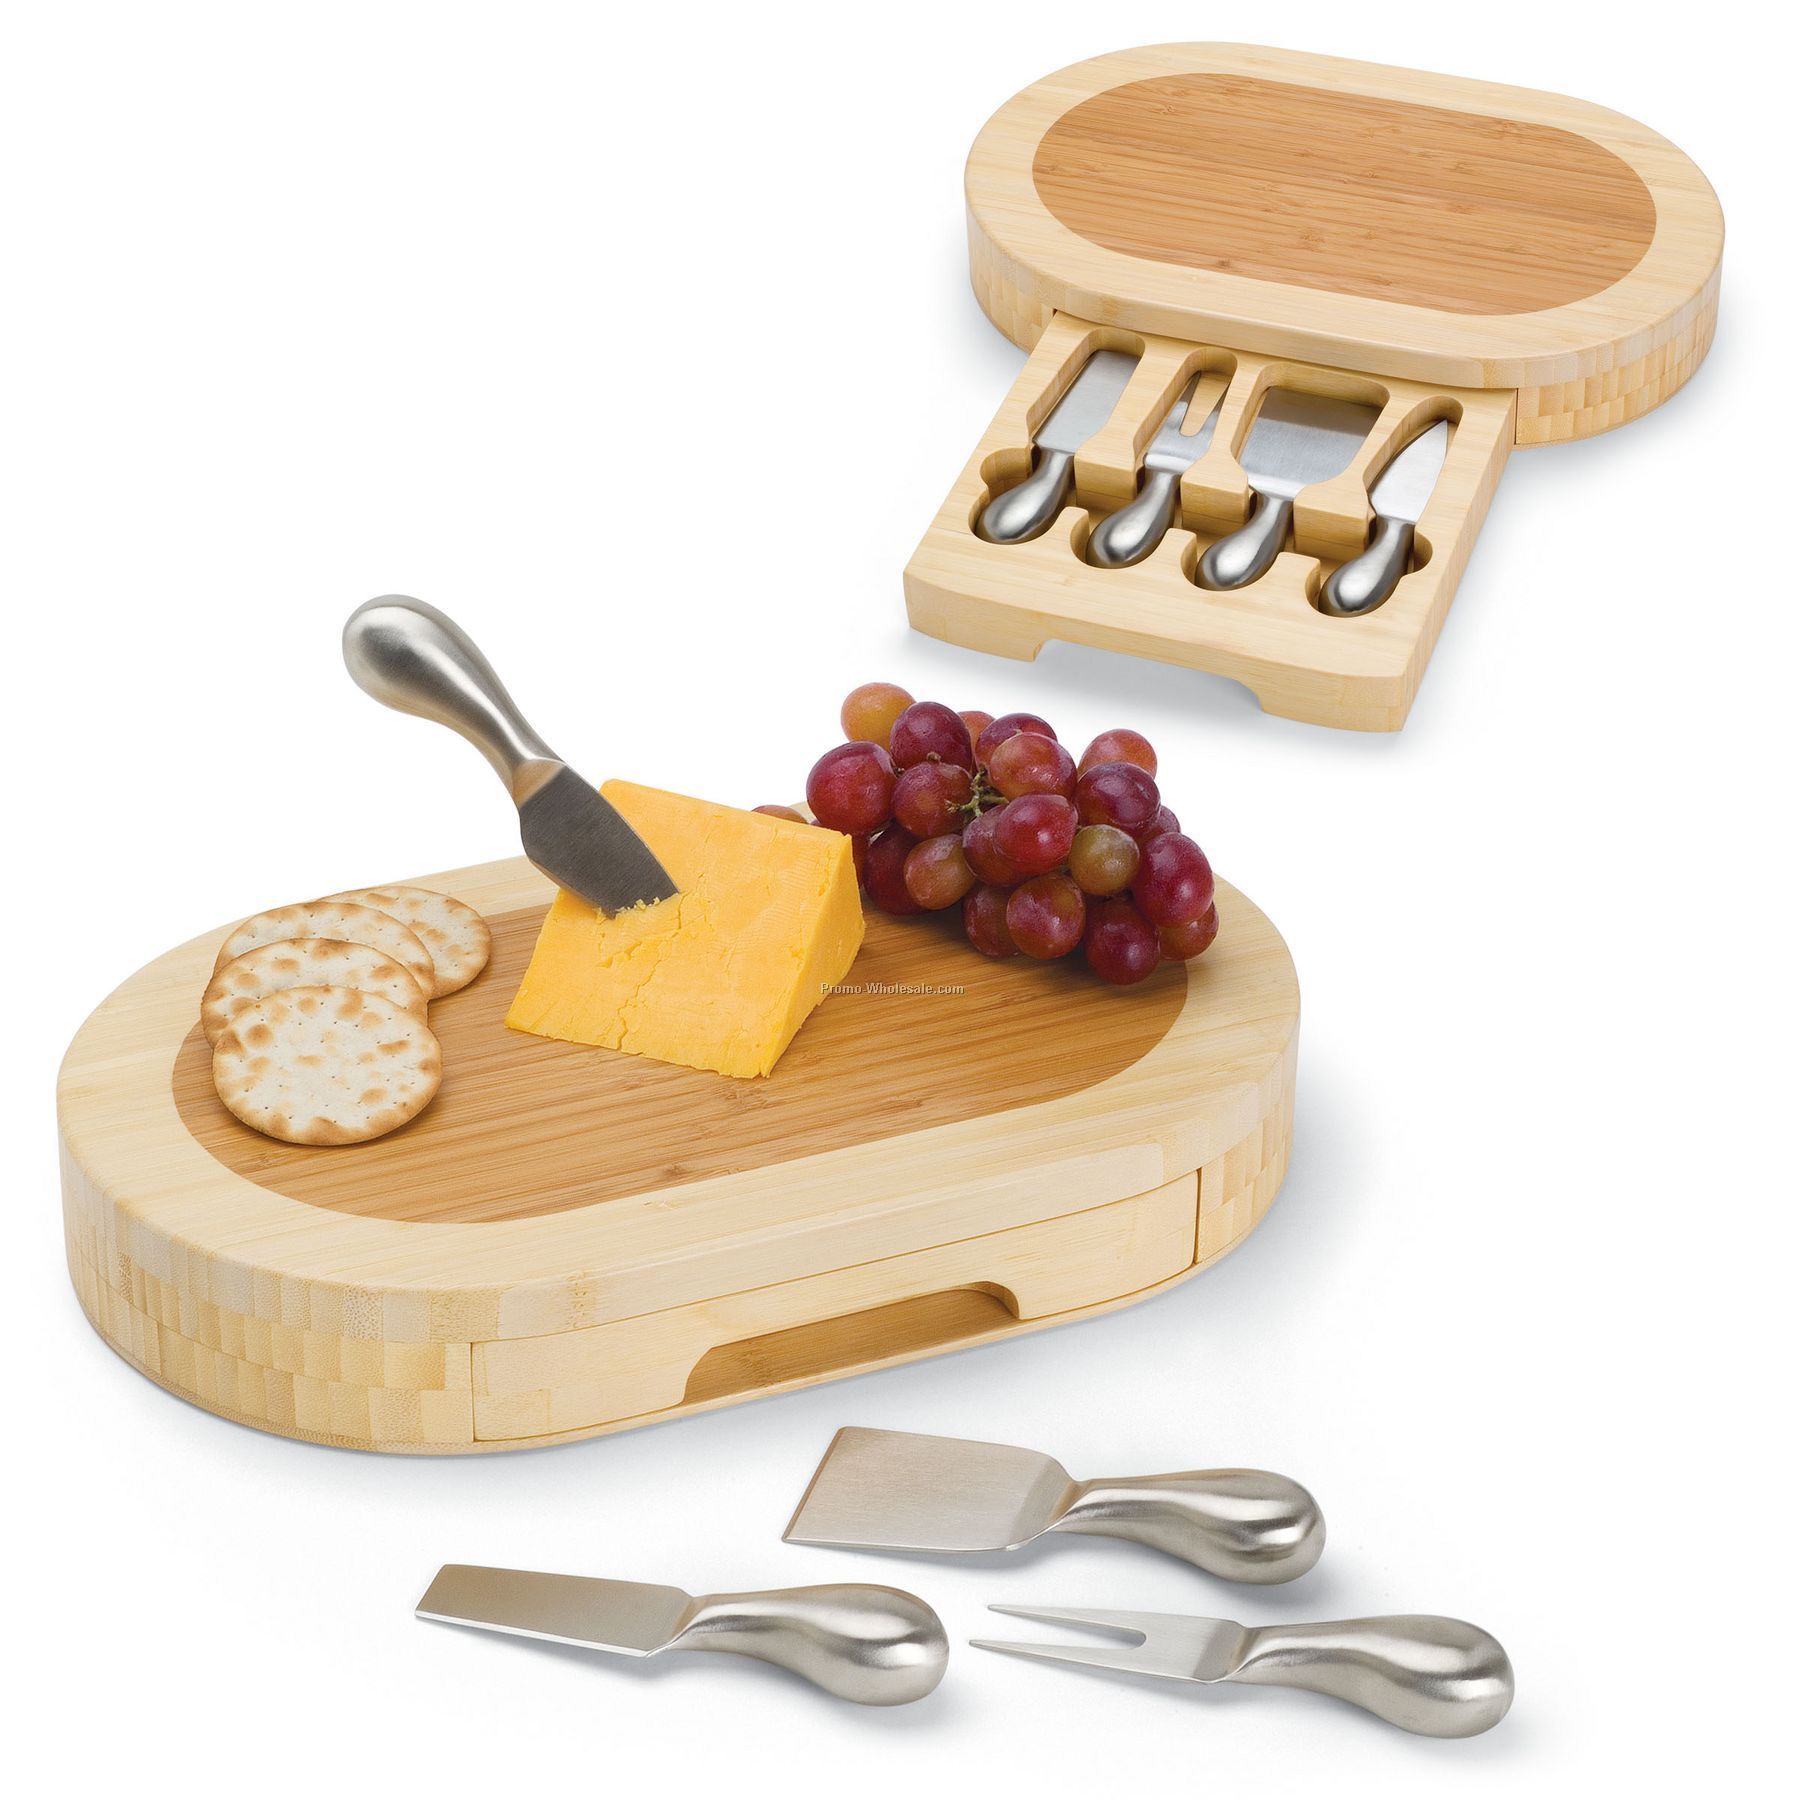 Formaggio Oval Cutting Board With Slide Out Drawer For Cheese Tools